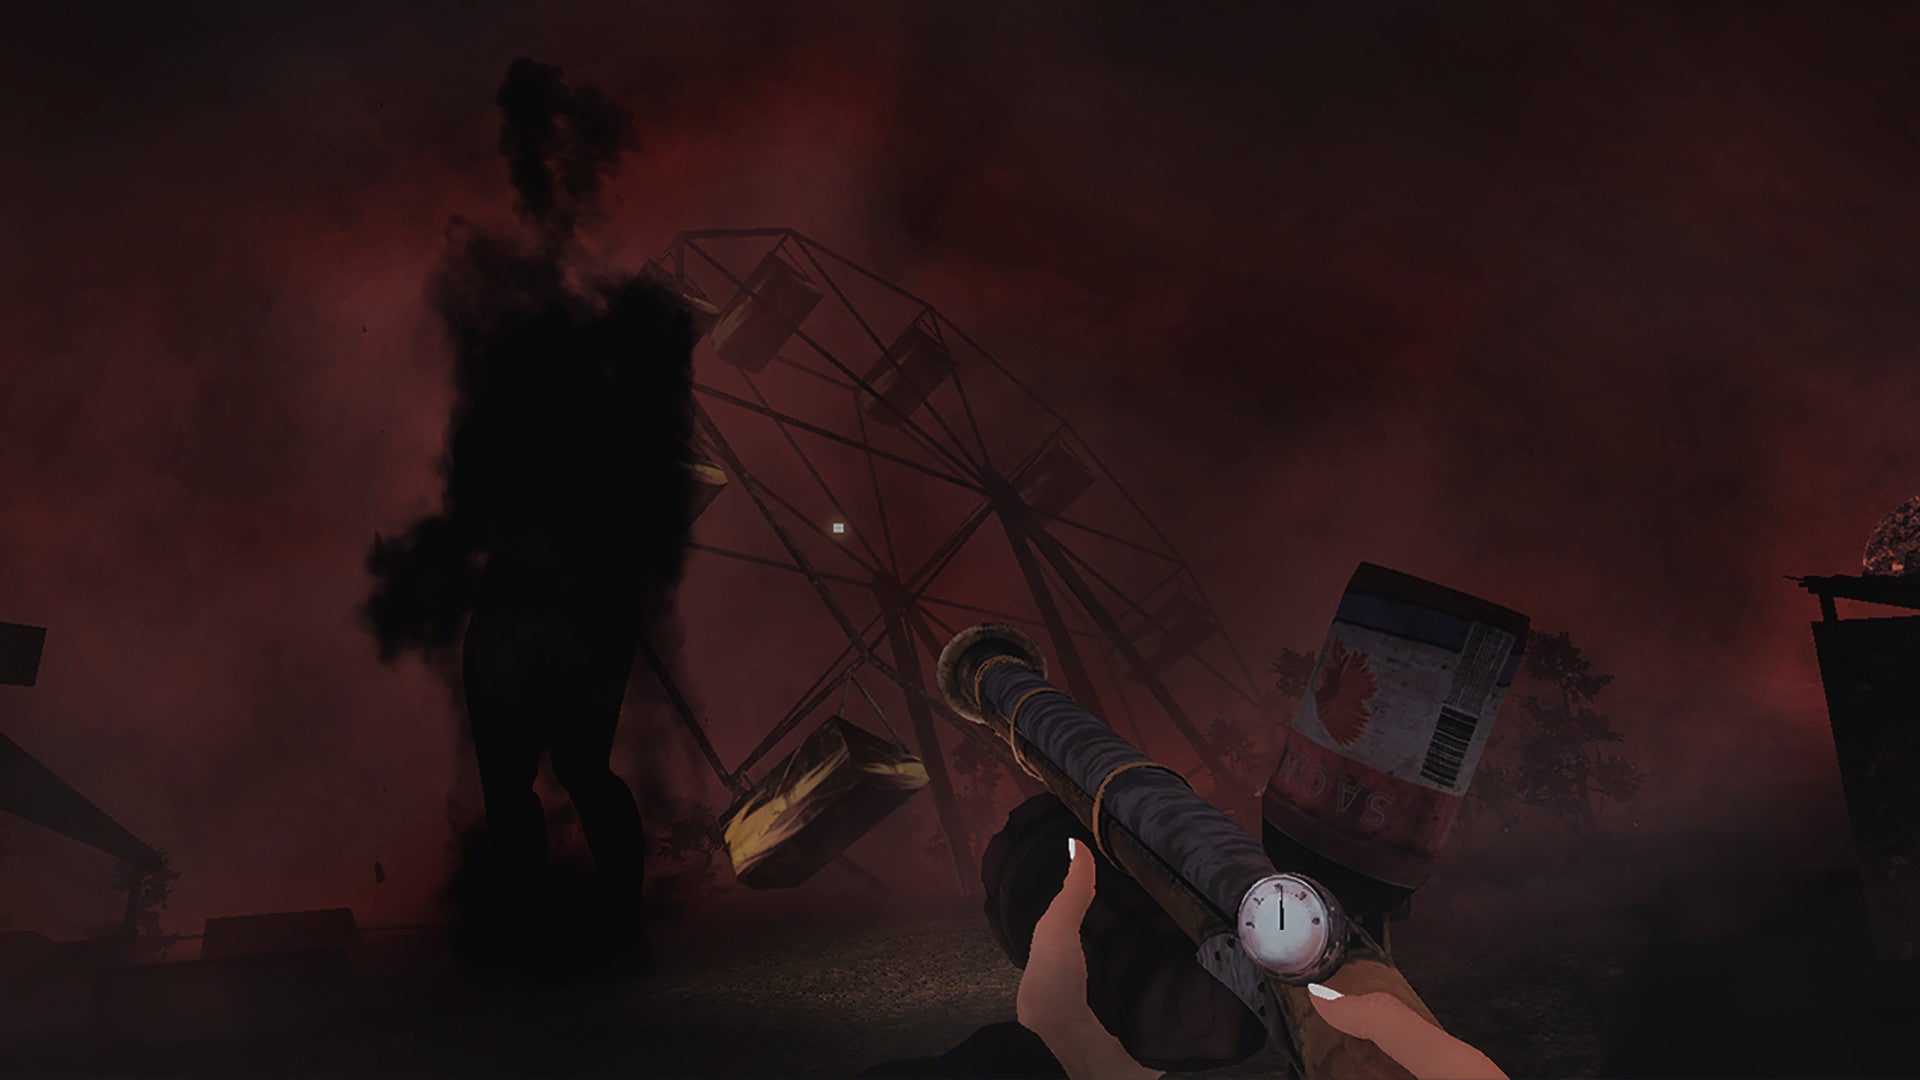 The protagonist of Sylvio aims a makeshift gun at a shadow in front of an abandoned Ferris wheel